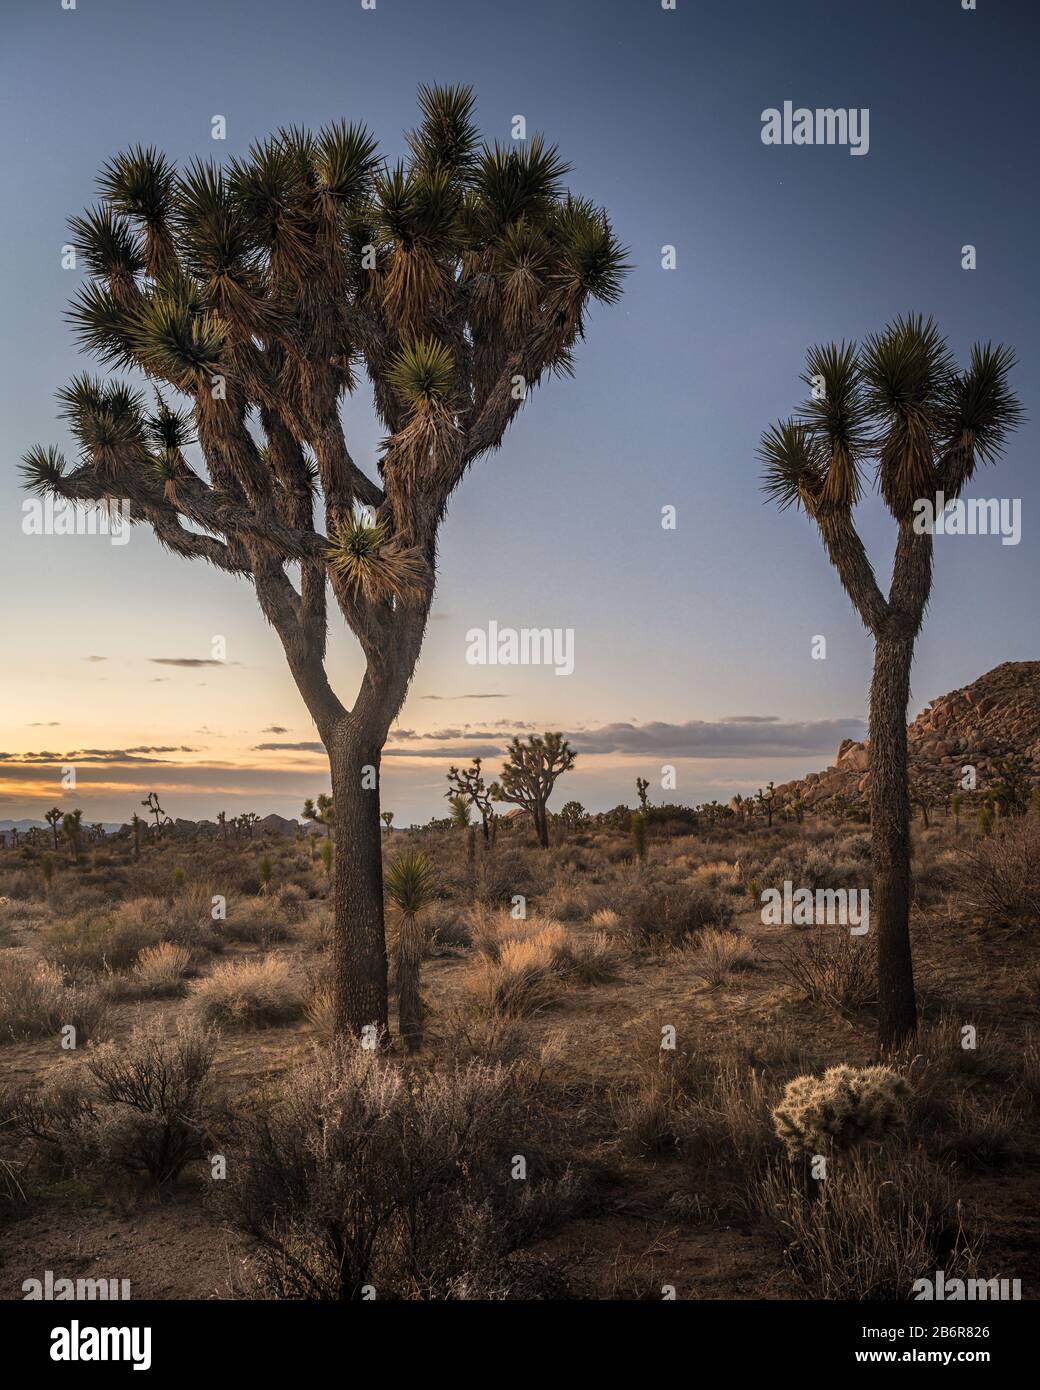 Joshua Tree National Park is a vast protected area in southern California. Stock Photo